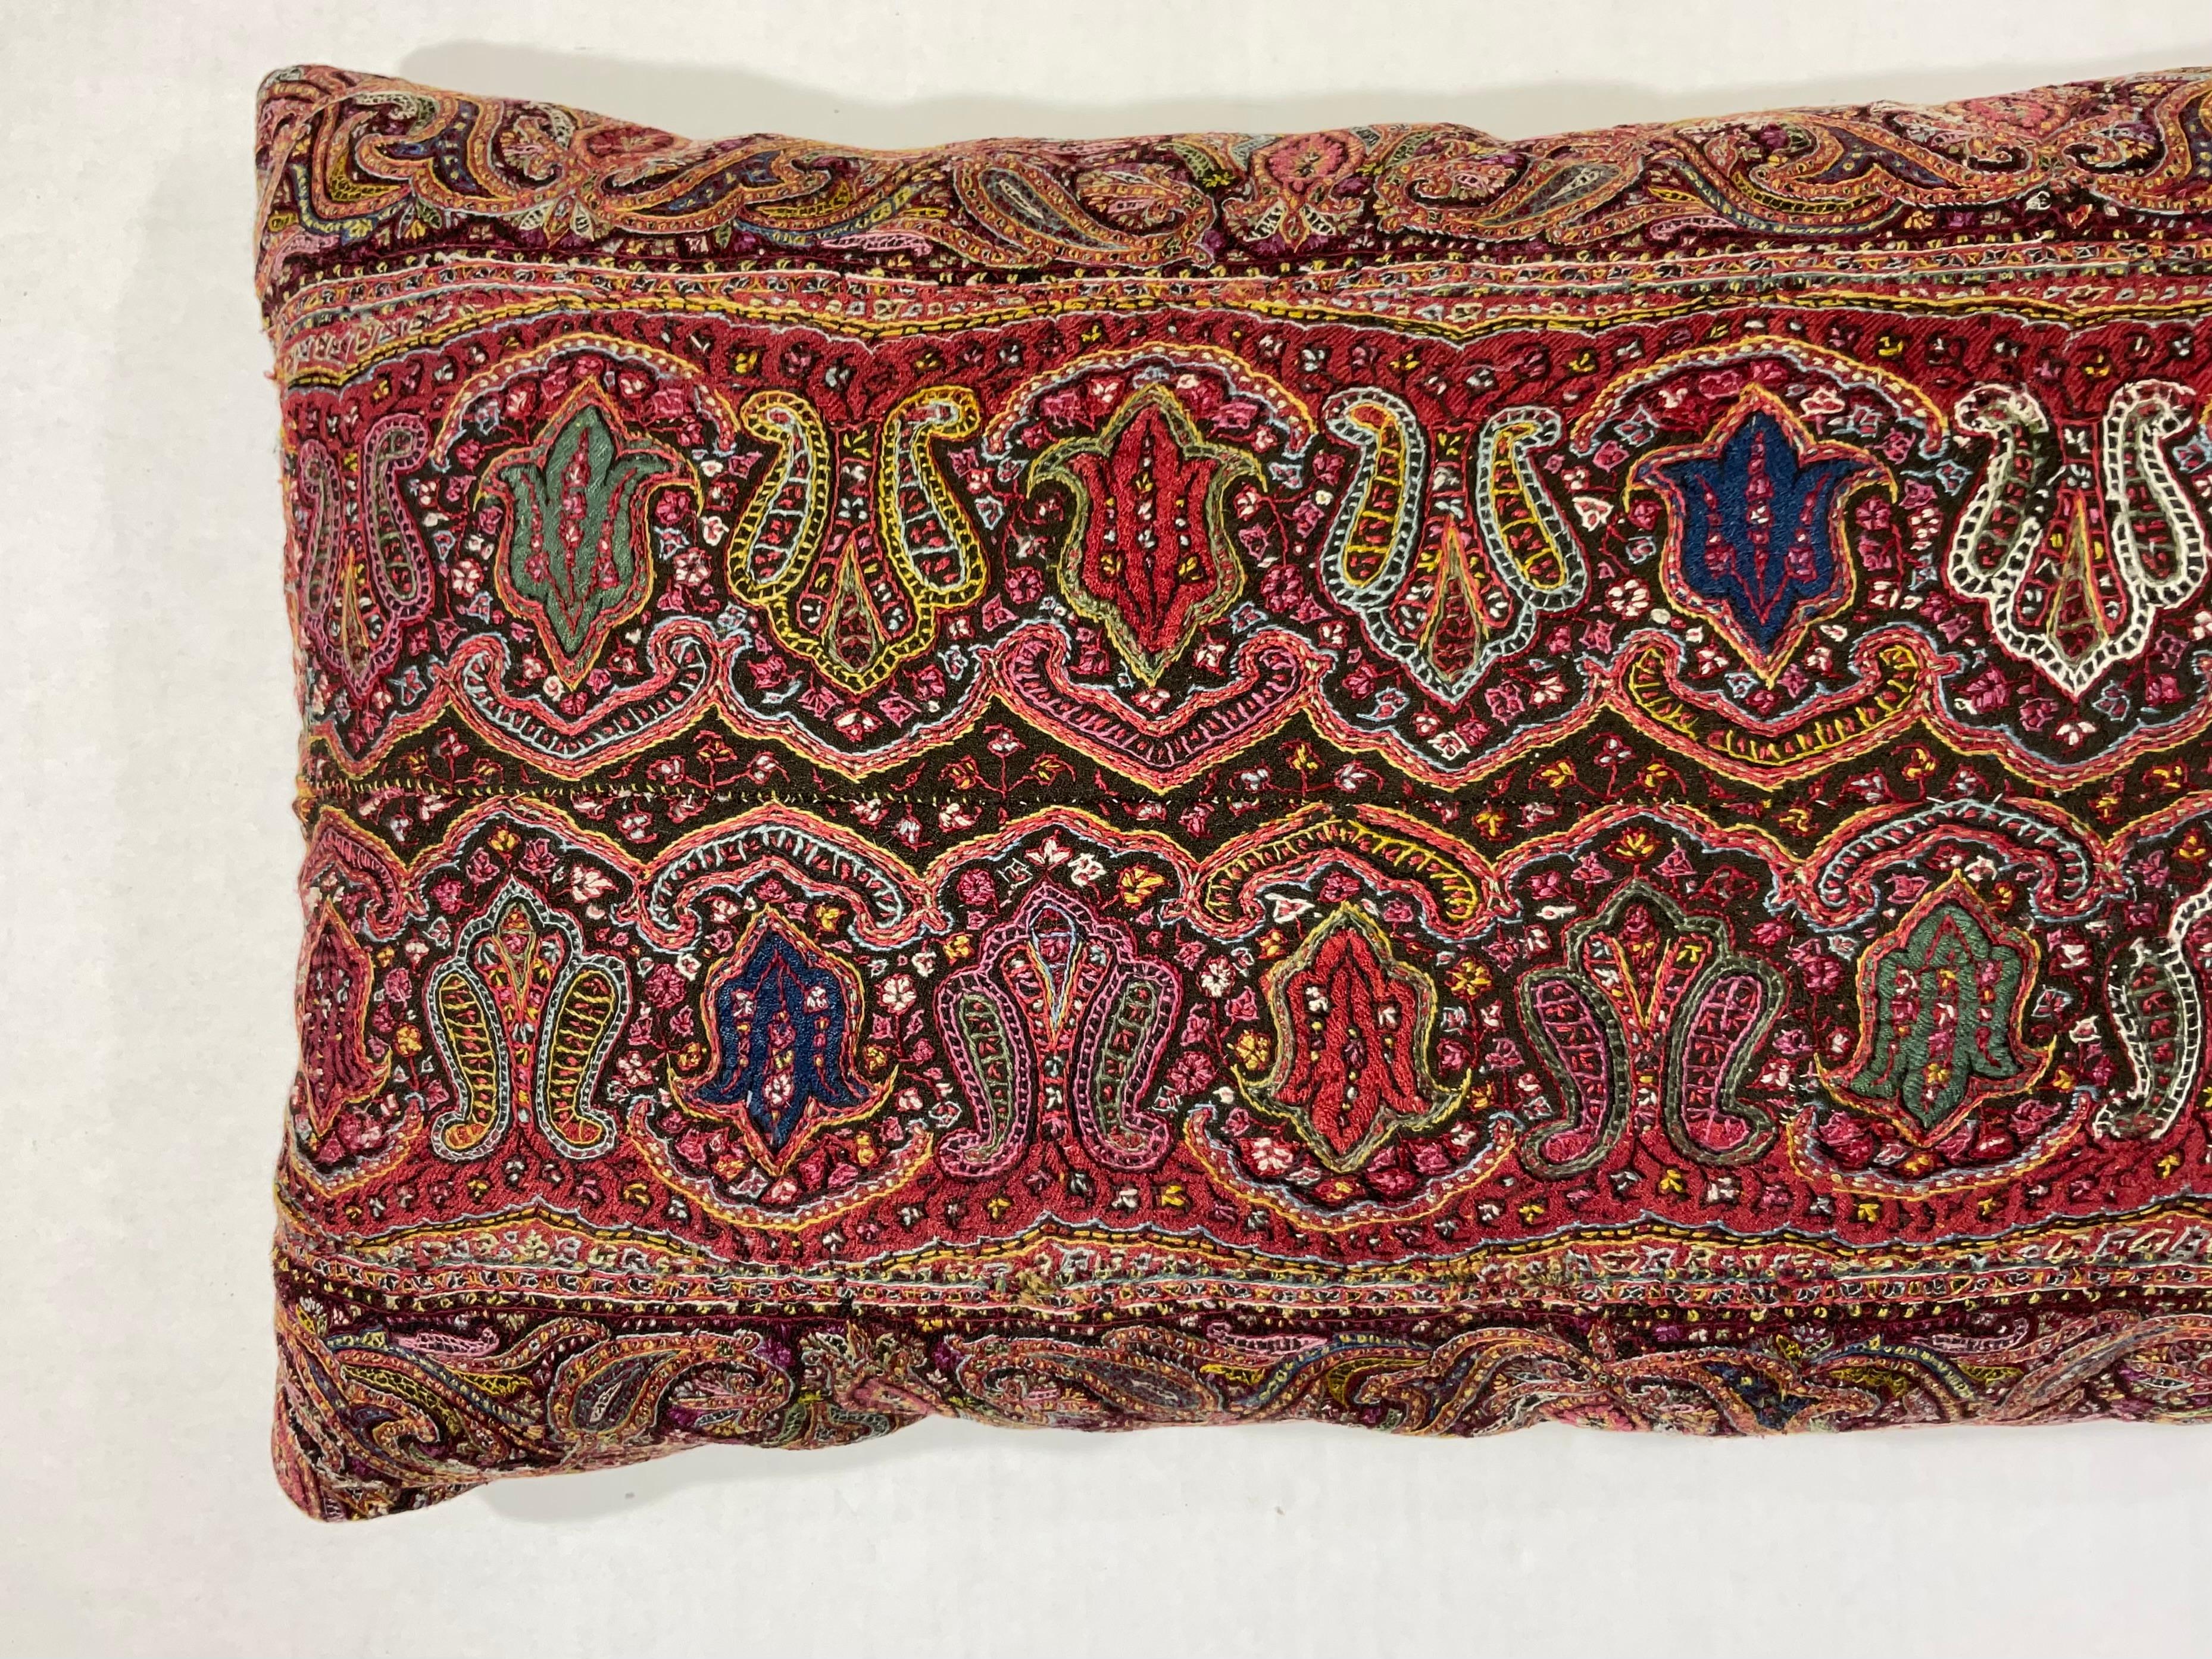 20th Century Single Hand Embroidery Persian Suzani Pillow For Sale